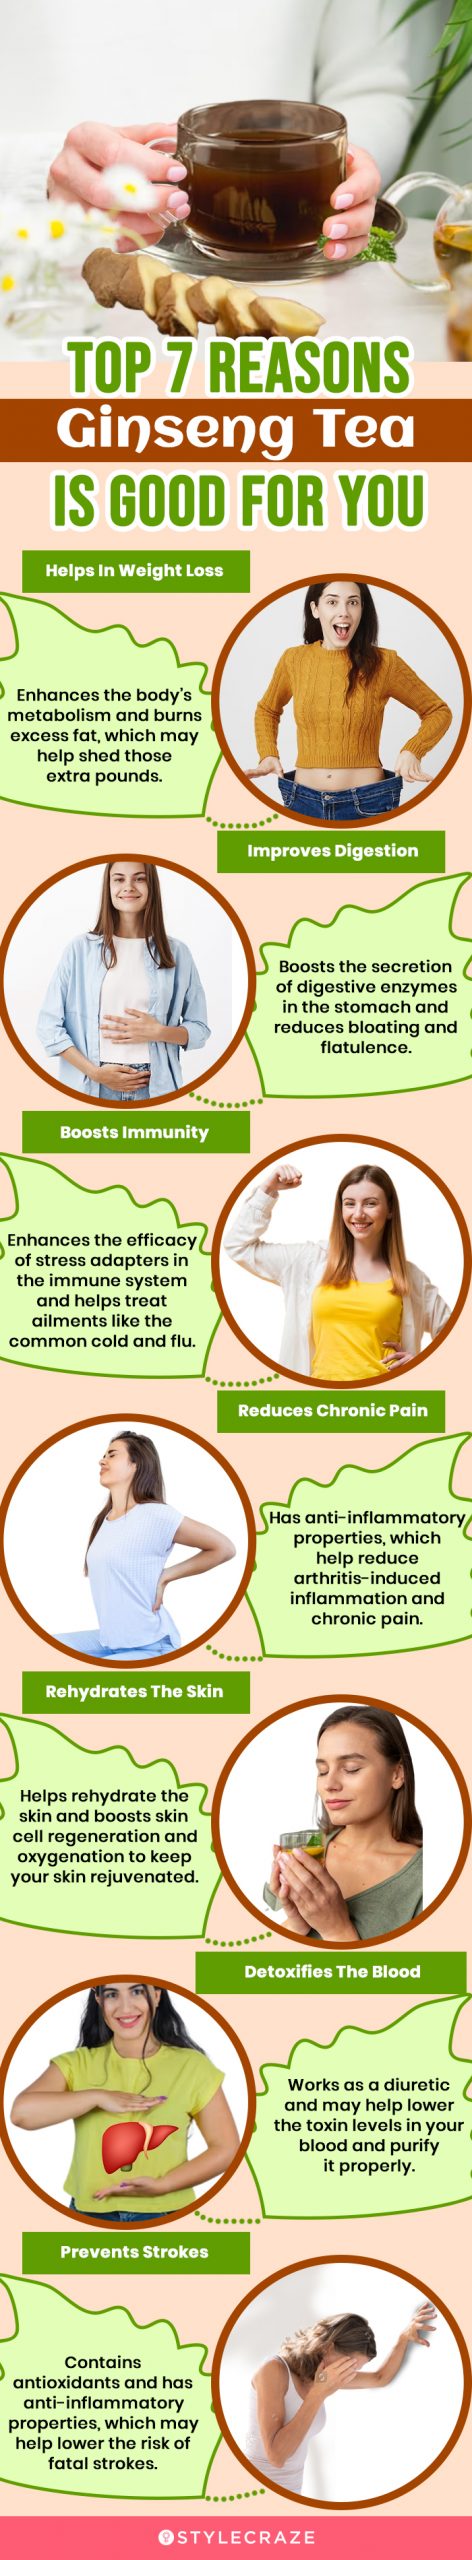 top 7 reasons ginseng tea is good for you (infographic)